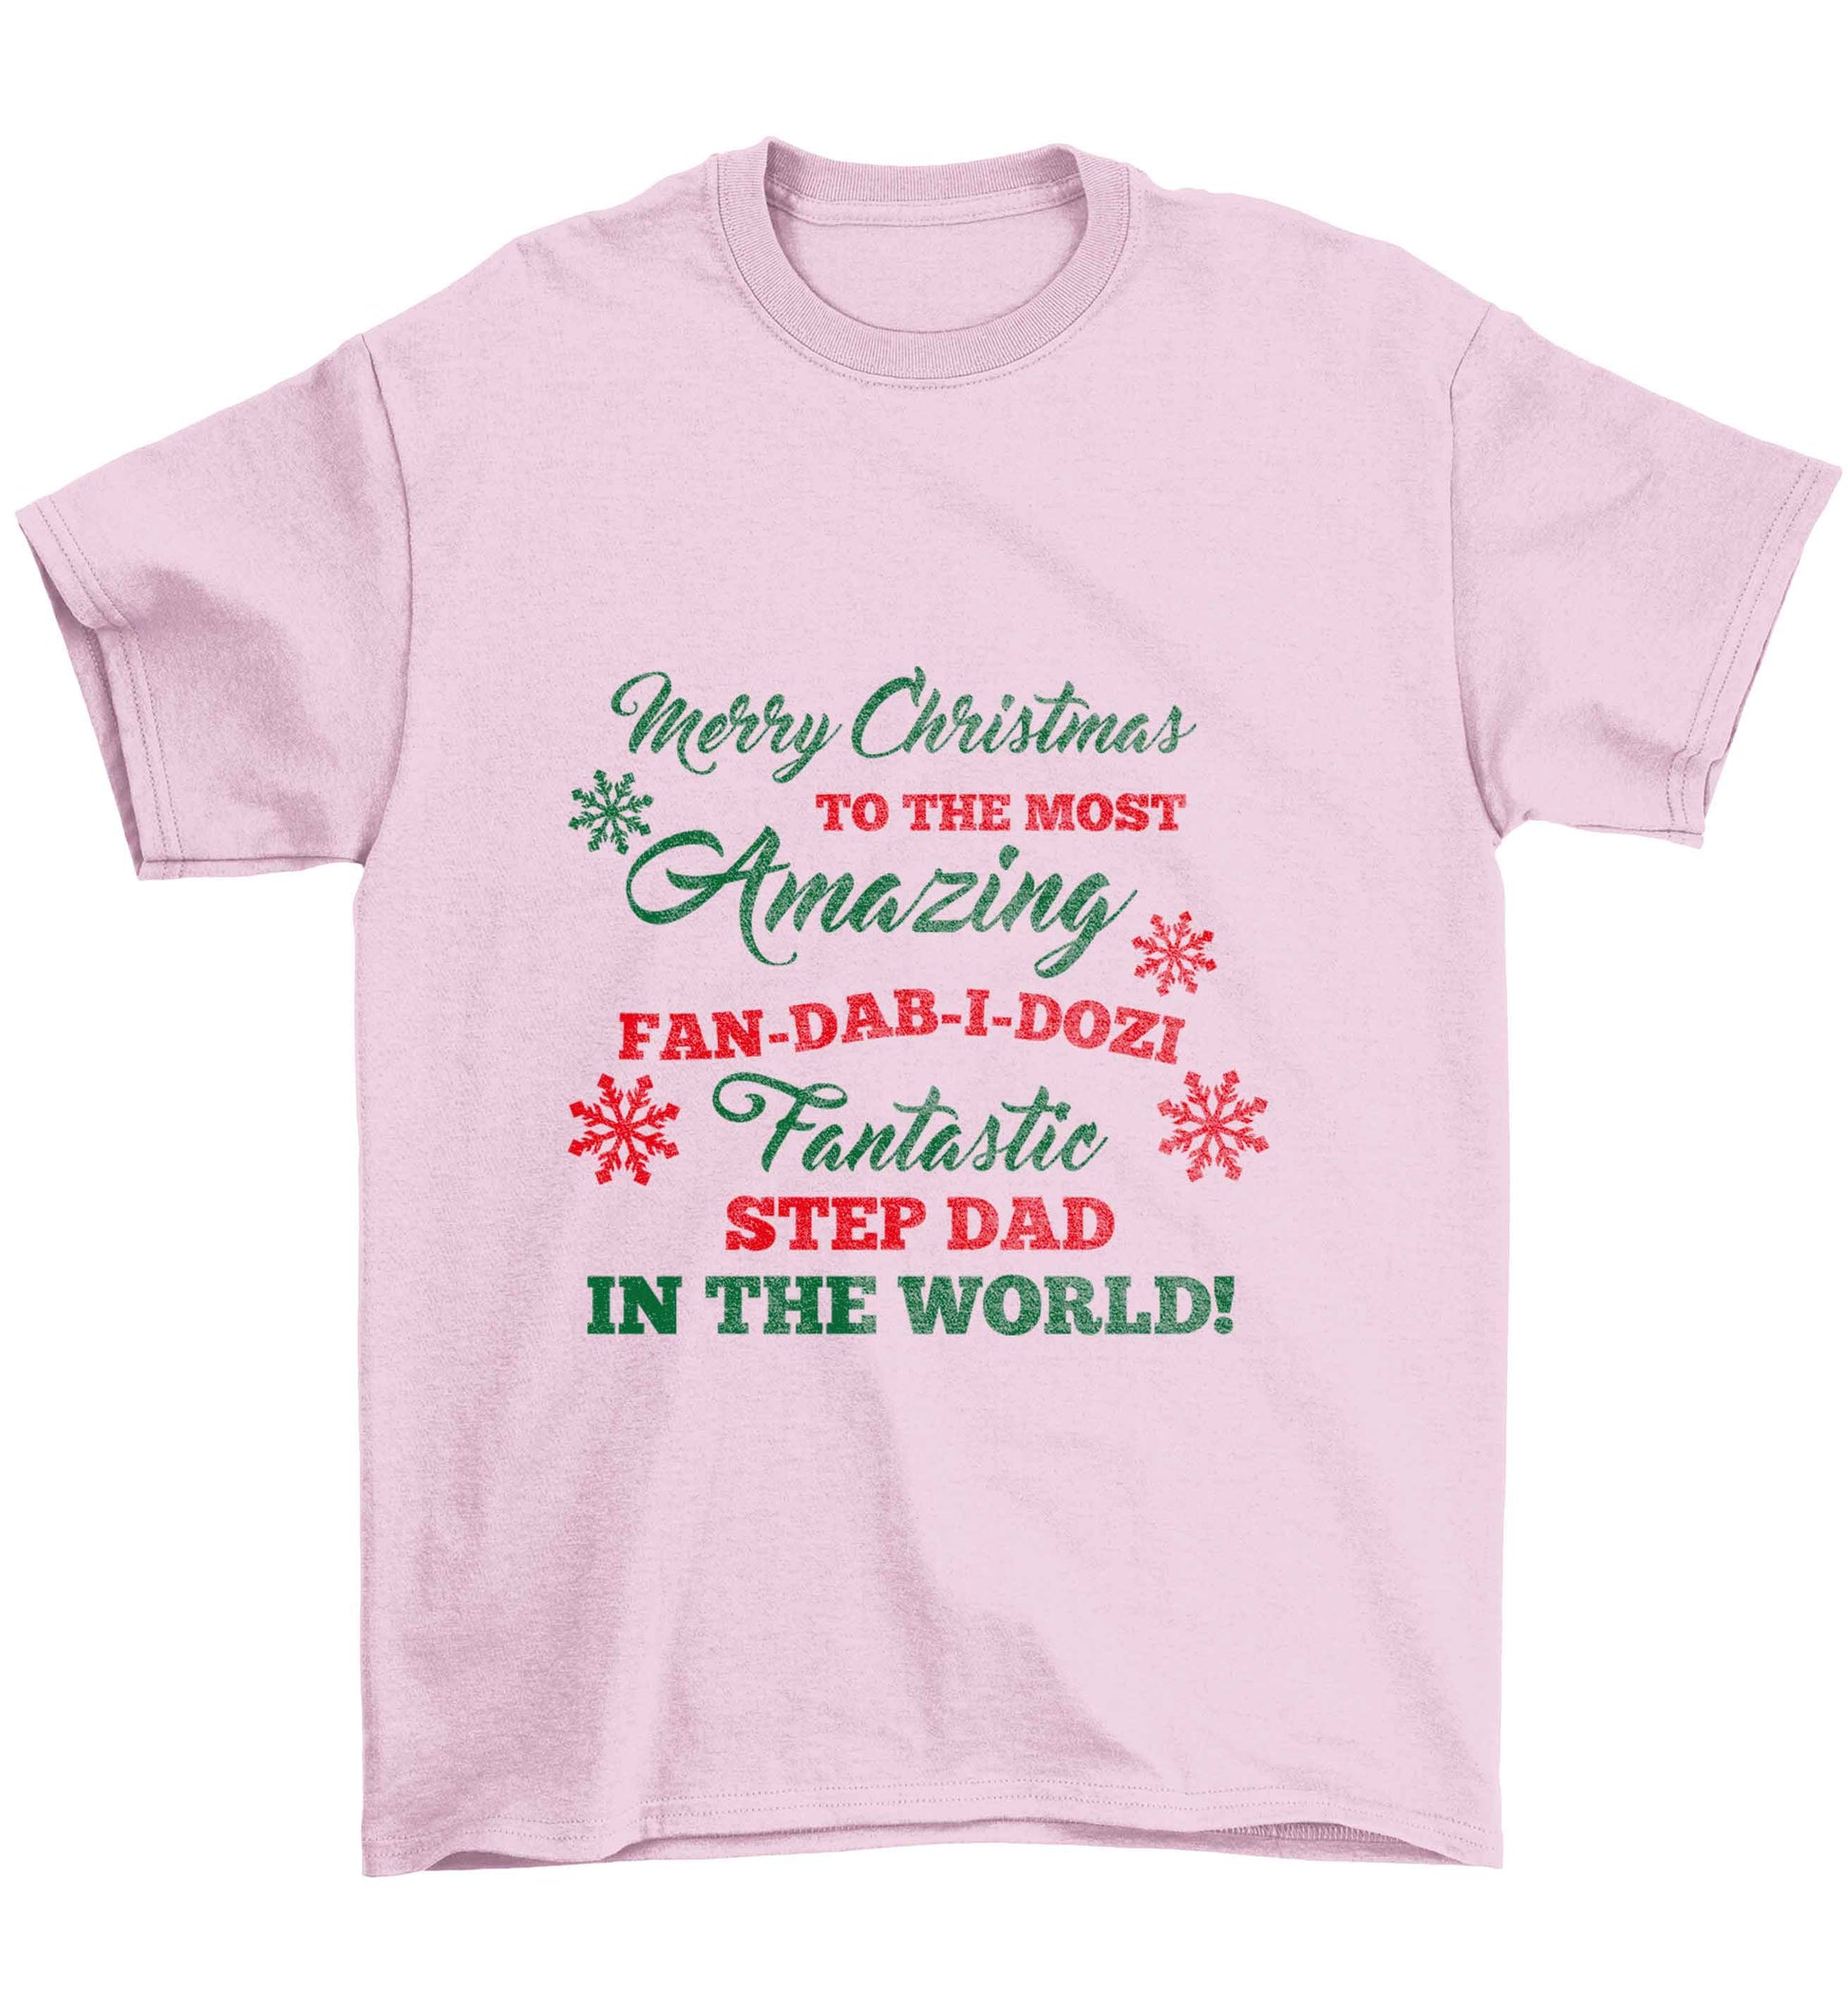 Merry Christmas to the most amazing fan-dab-i-dozi fantasic Step Dad in the world Children's light pink Tshirt 12-13 Years